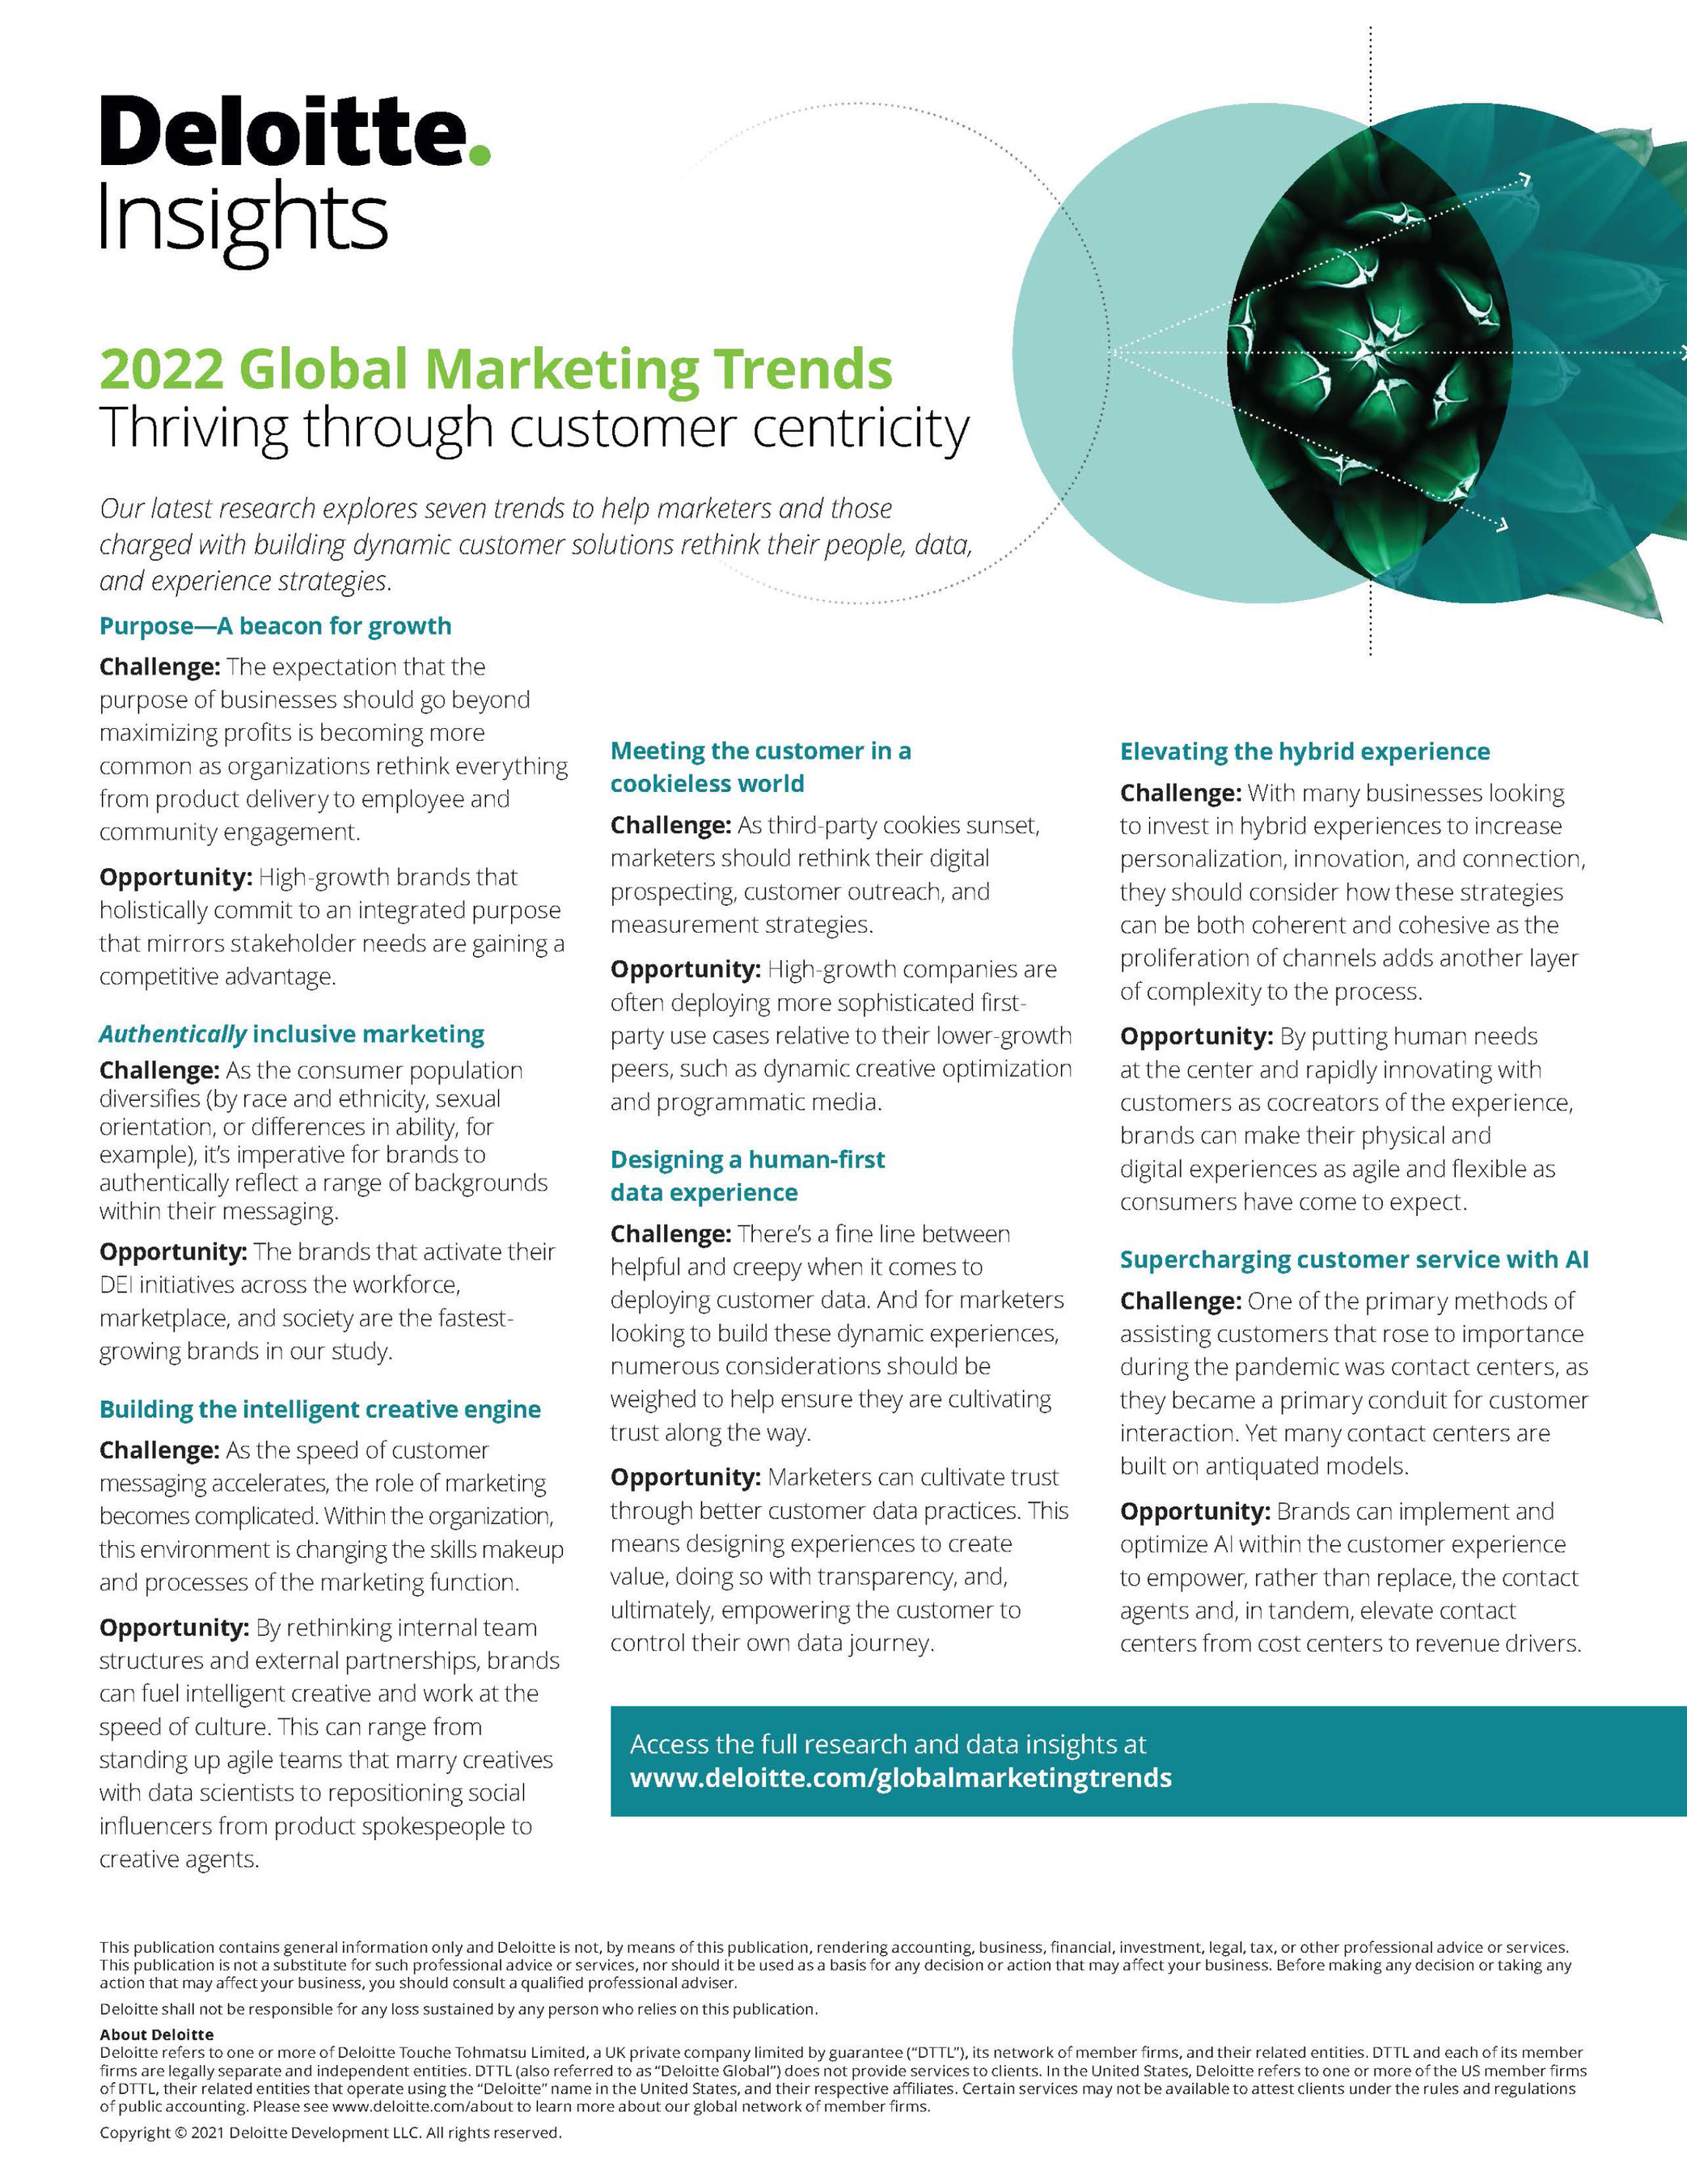 Deloitte Releases Third Annual Global Marketing Trends Report Thriving